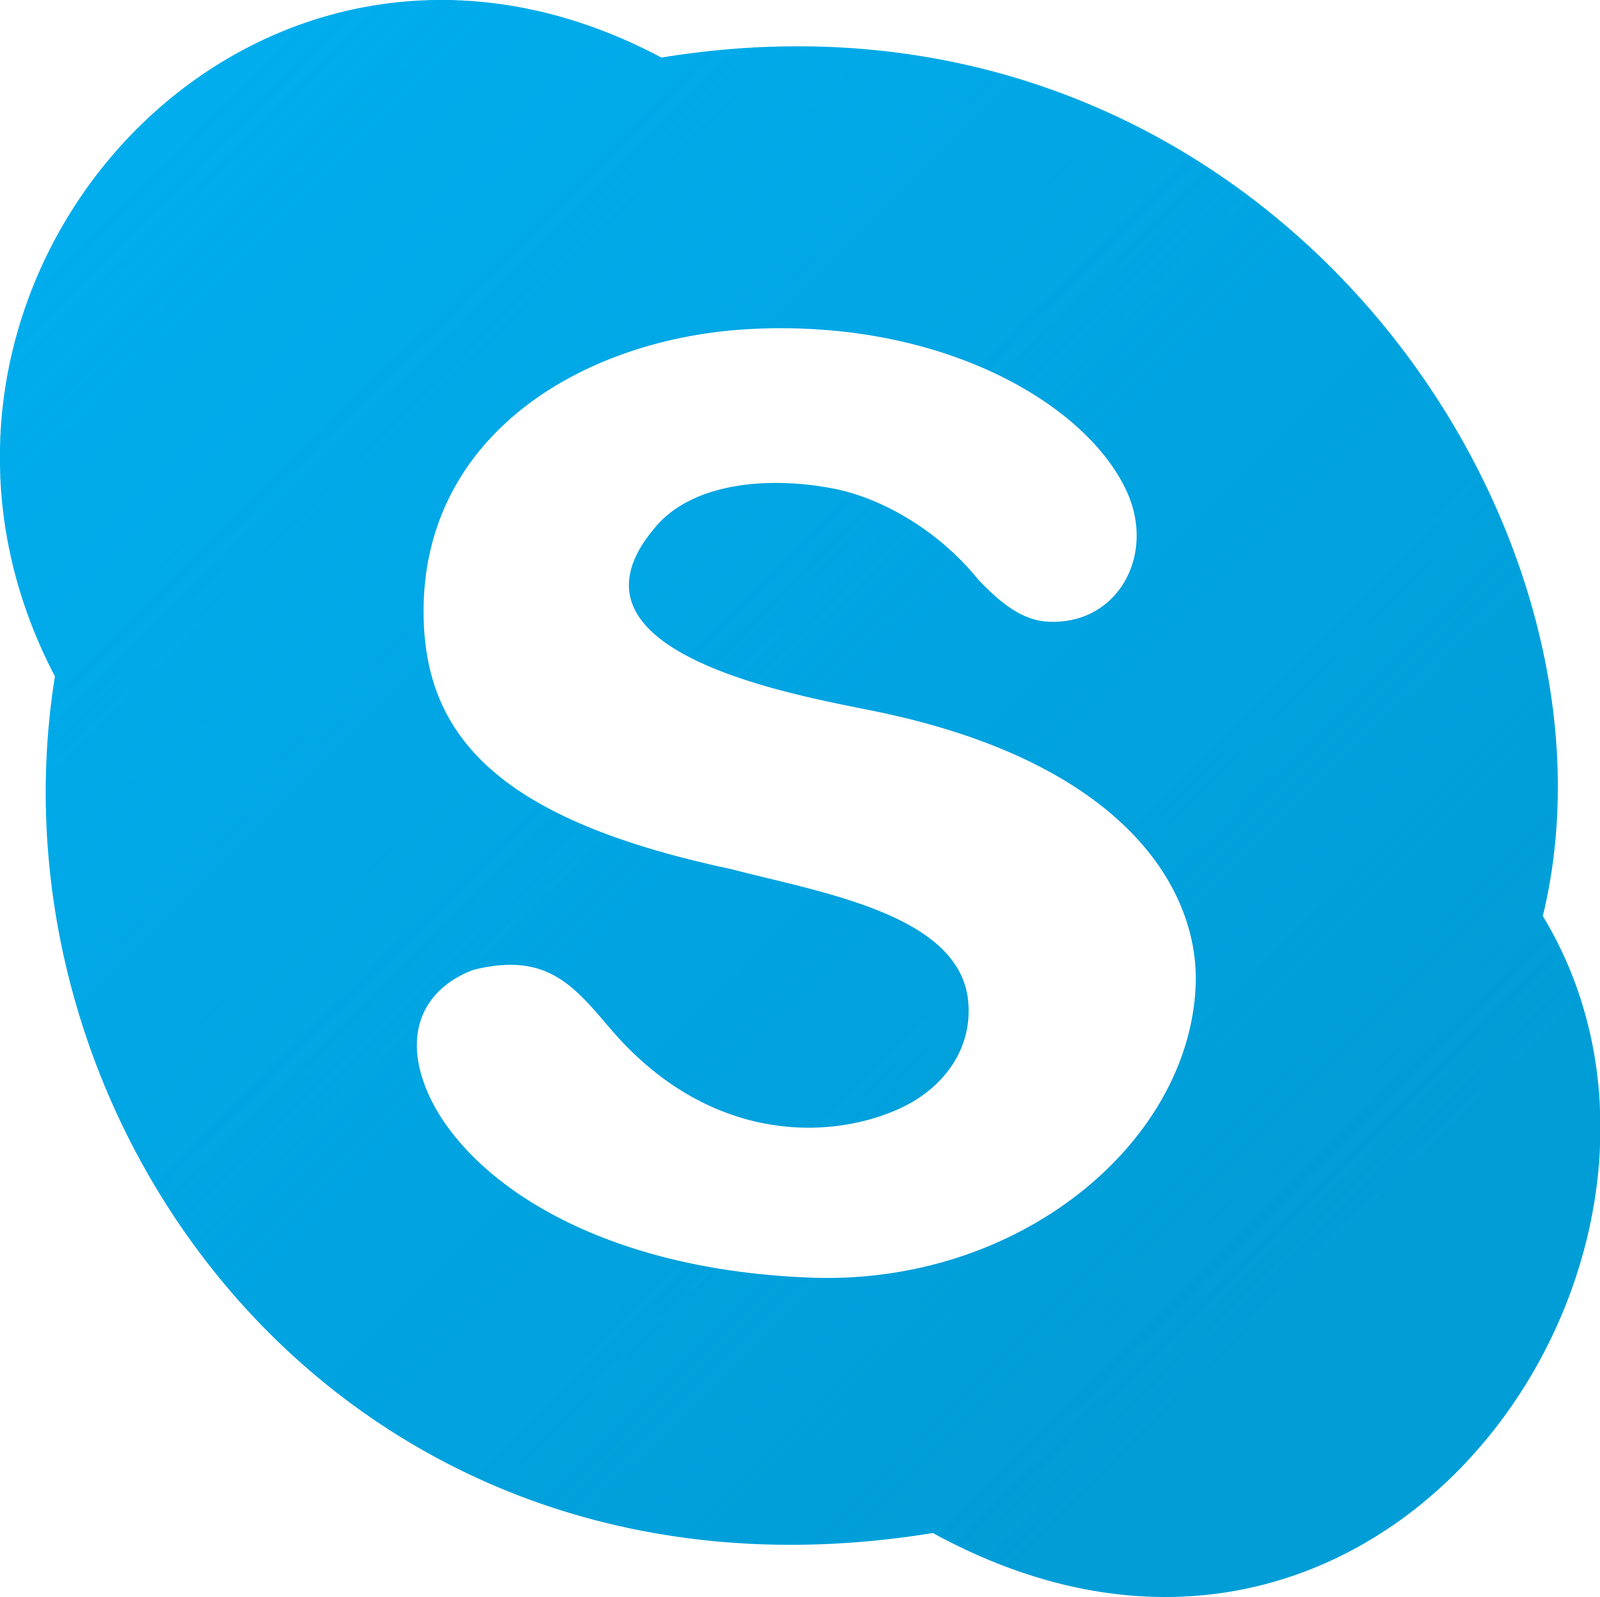 File:Skype-icon-new.png - Wikimedia Commons
